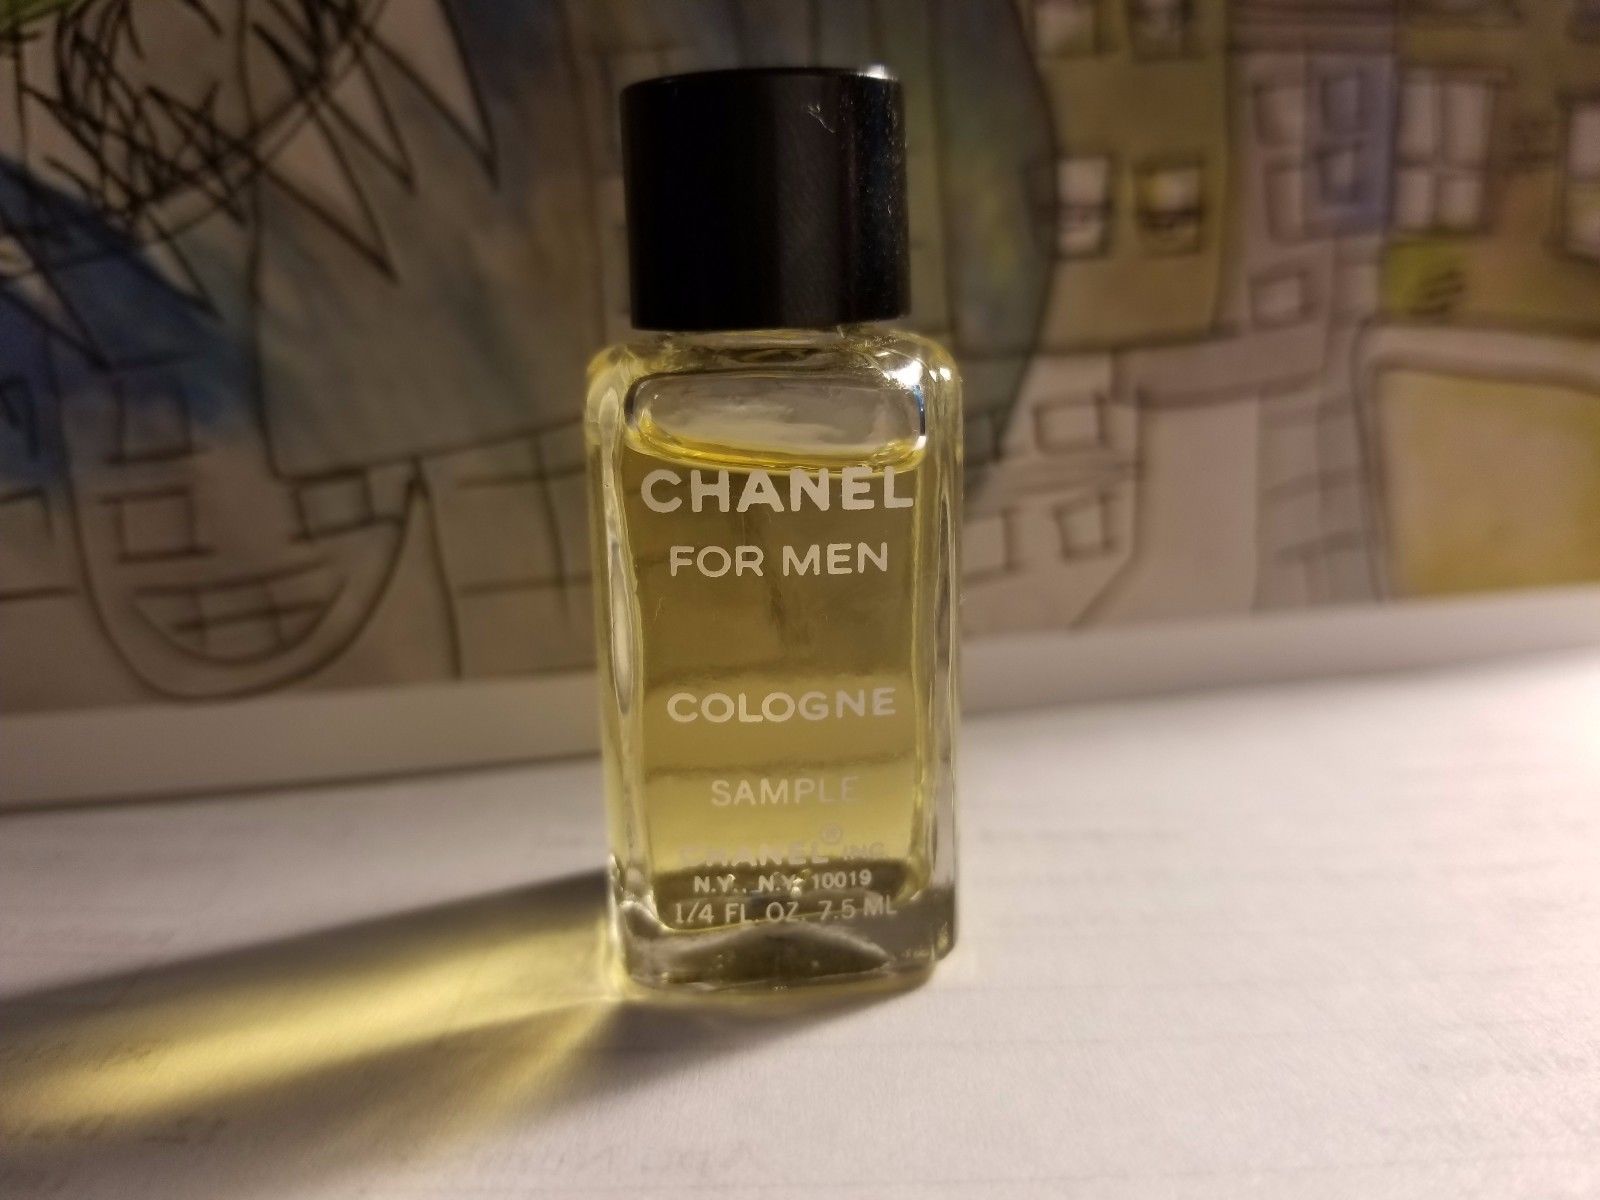 Chanel for Men Cologne Sample by Chanel 1/4 fl oz 7.5 ml Fluid in